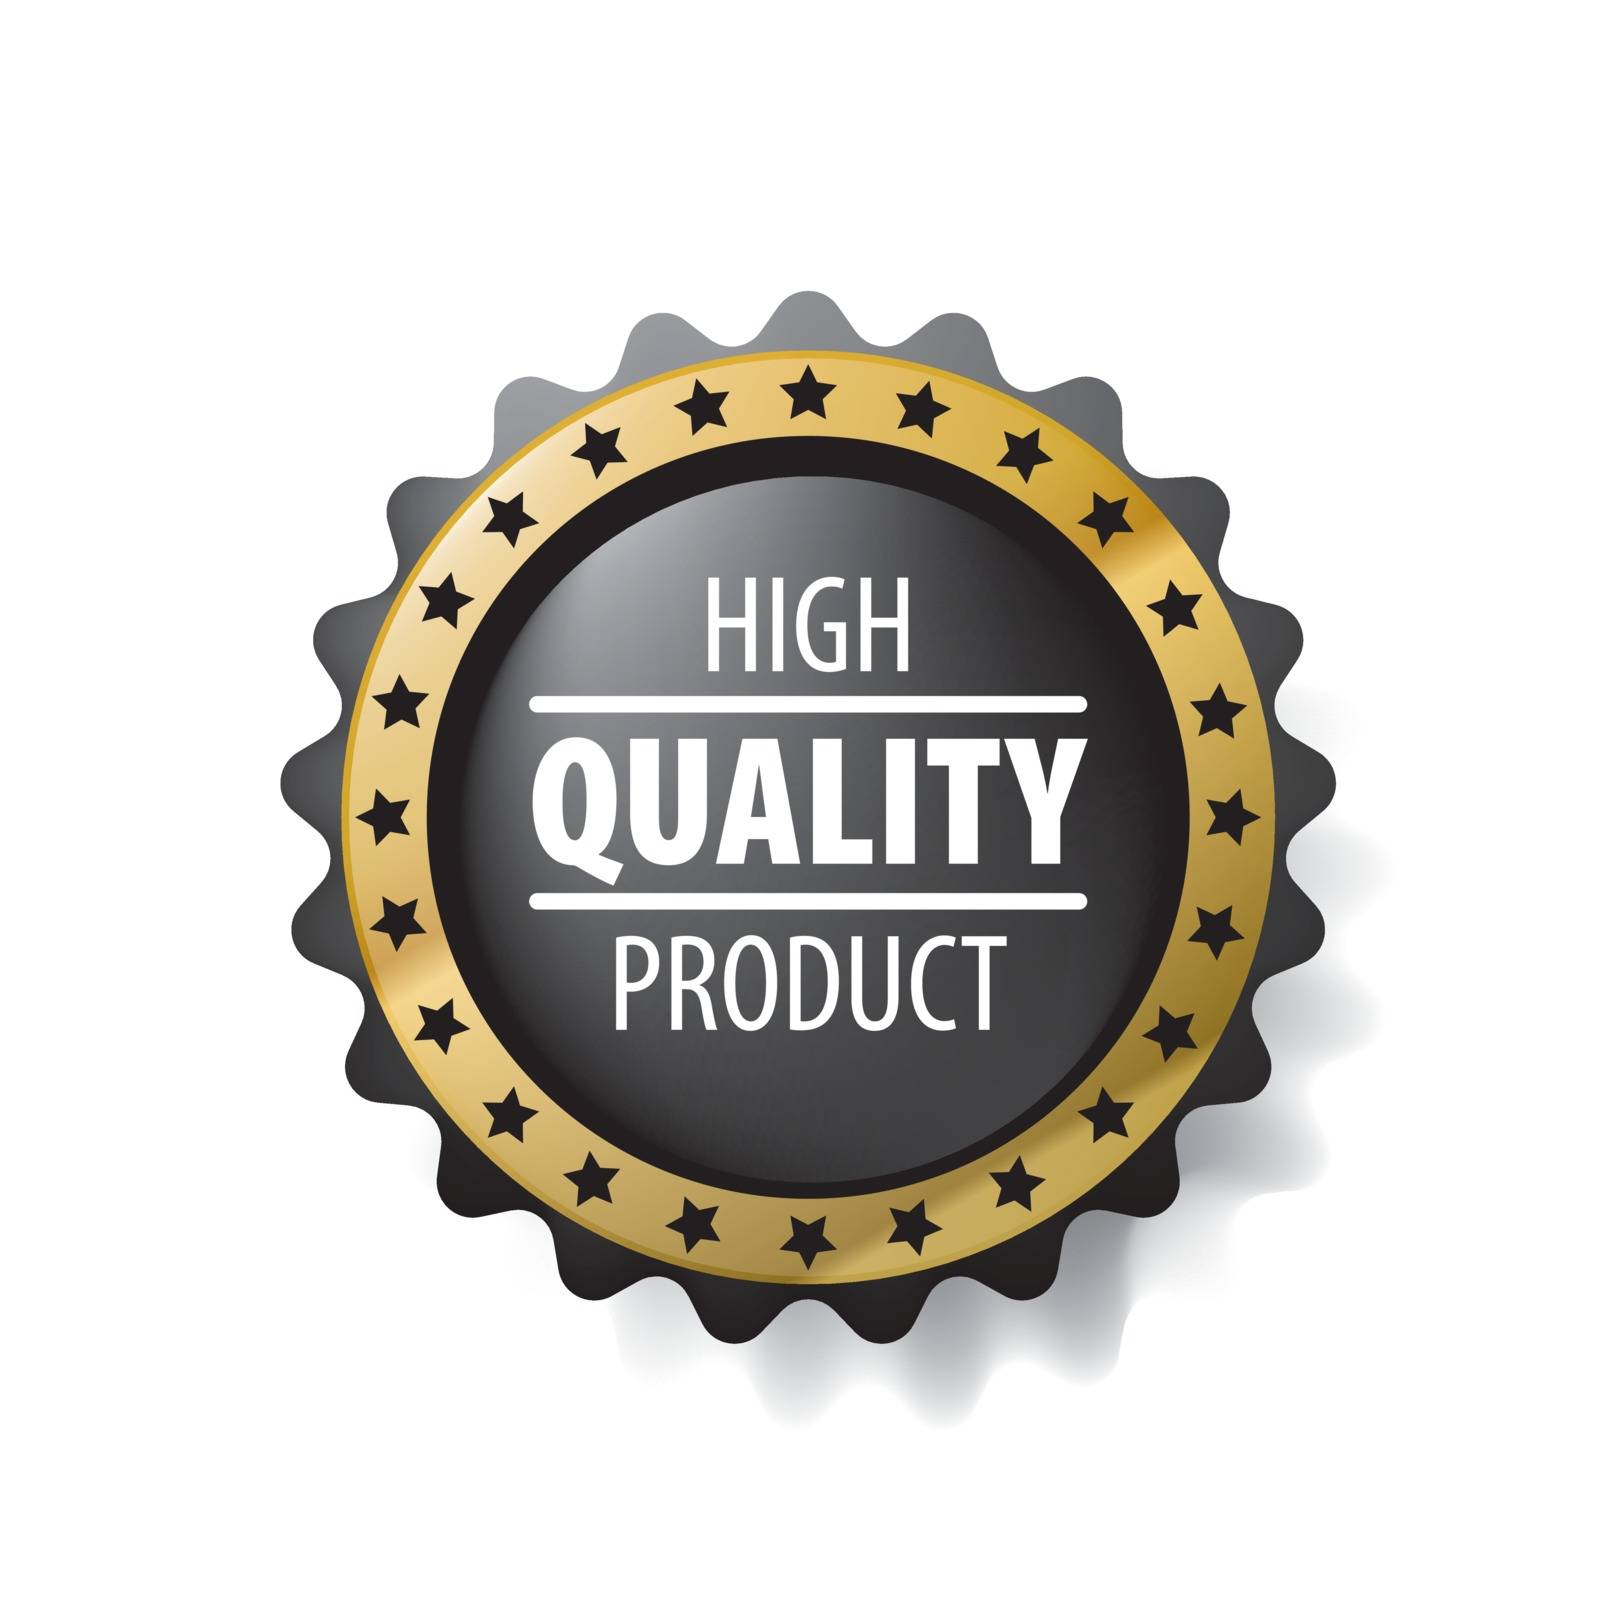 Best quality product vector sign on white background.